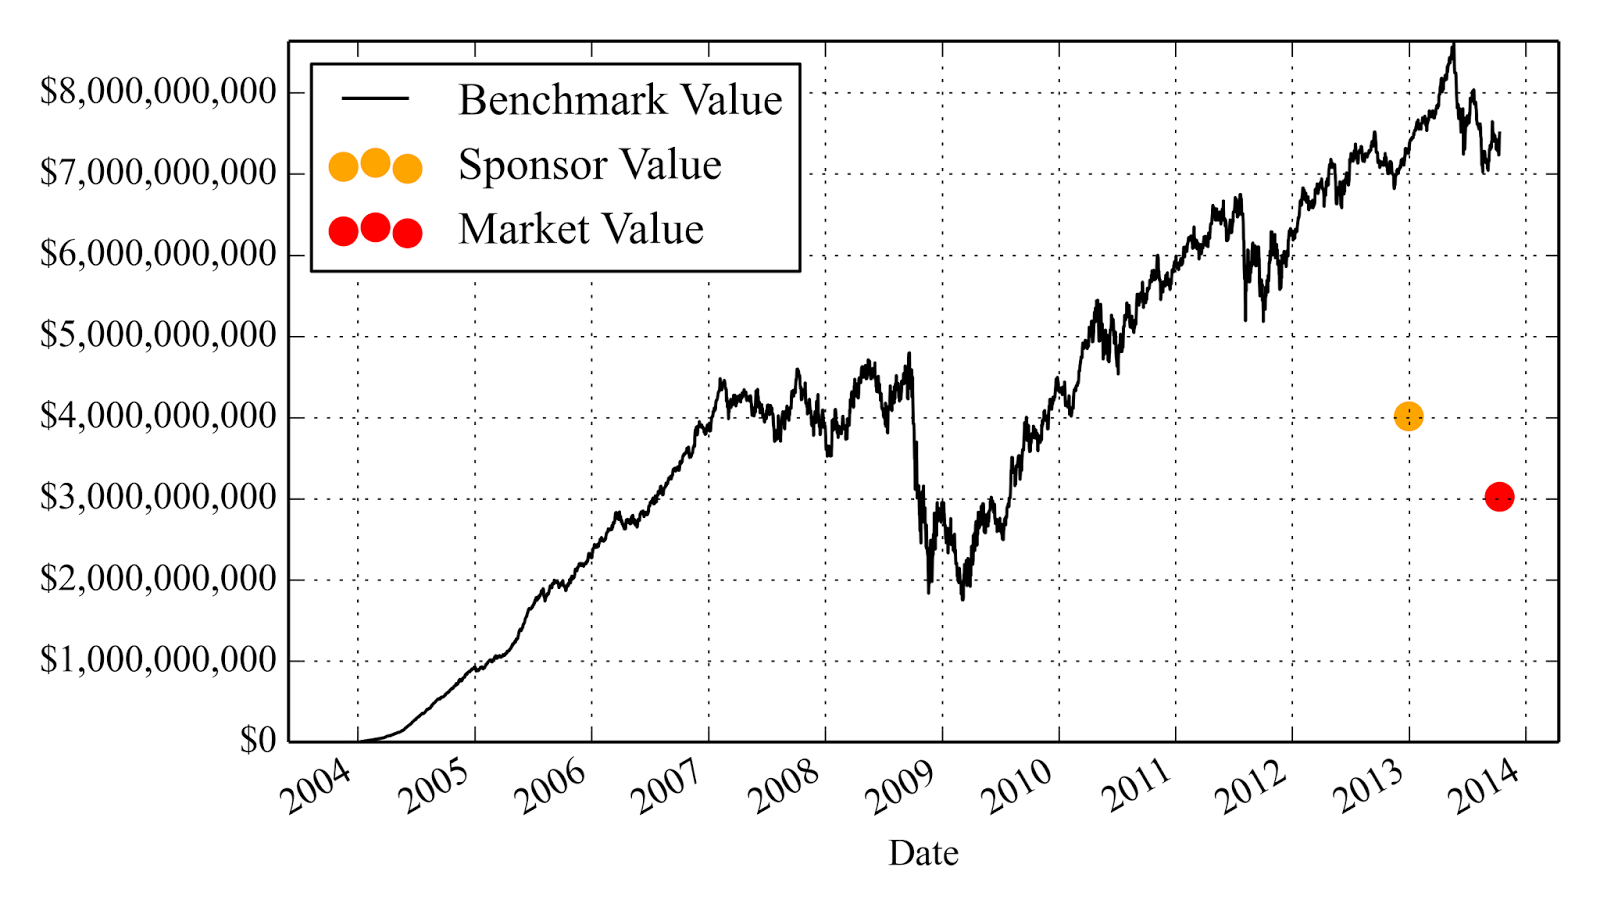 A figure showing a line graph demonstrating investors' net investment in Wells REIT II applied to Vanguard's Traded REIT Fund from 2004 to 2014.